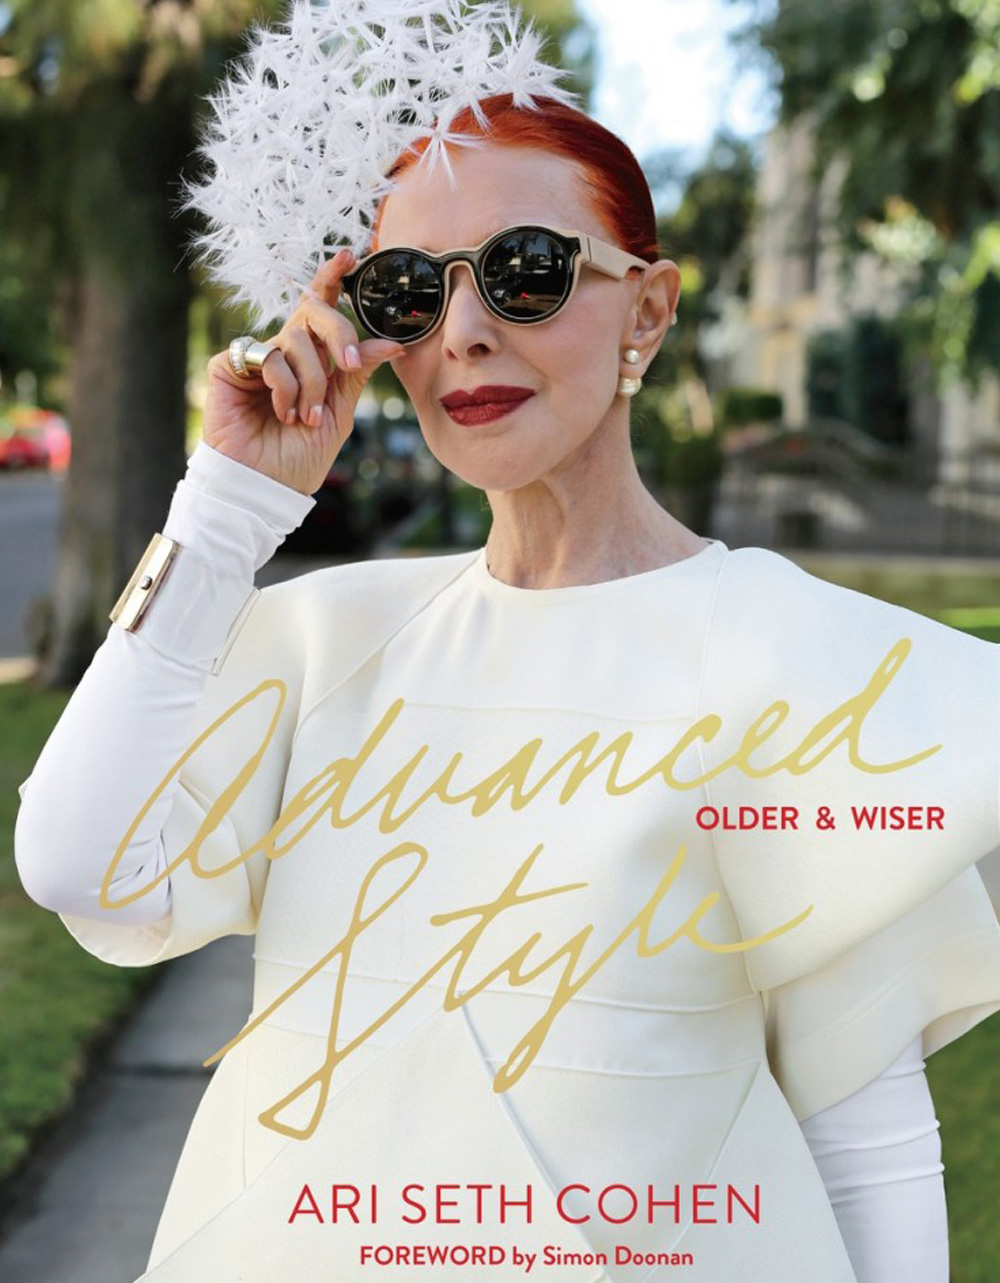 Advanced Style: Older and Wiser, by Ari Seth Cohen and Simon Doonan. Senior street style and inspiration from across the globe.